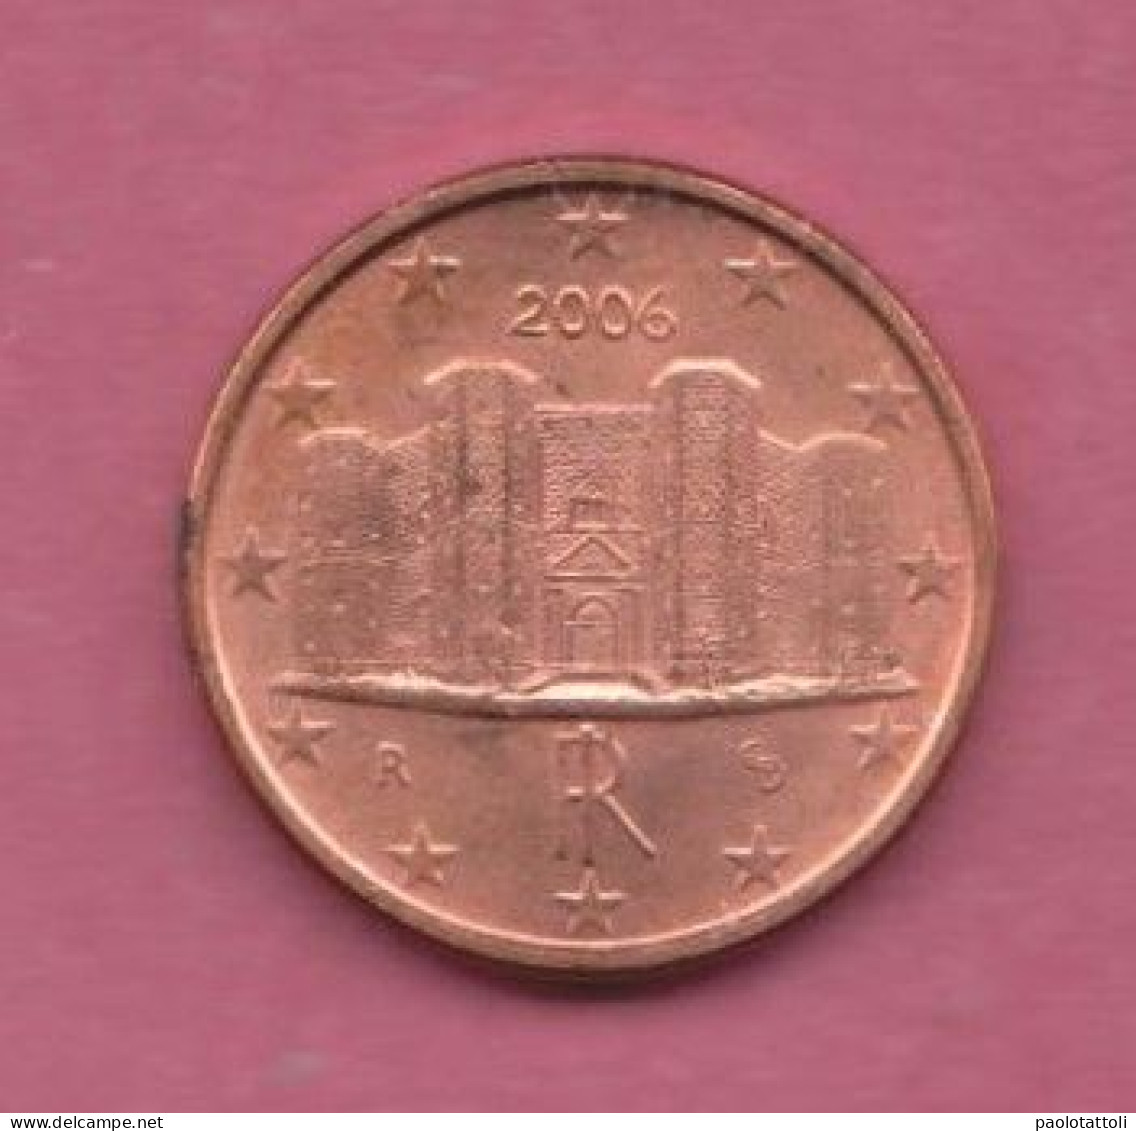 Italy. 2006- 1 Cent-  Copper Plated Steel- Obverse Dem Monte Castle . Reverse A Globe, - Italy